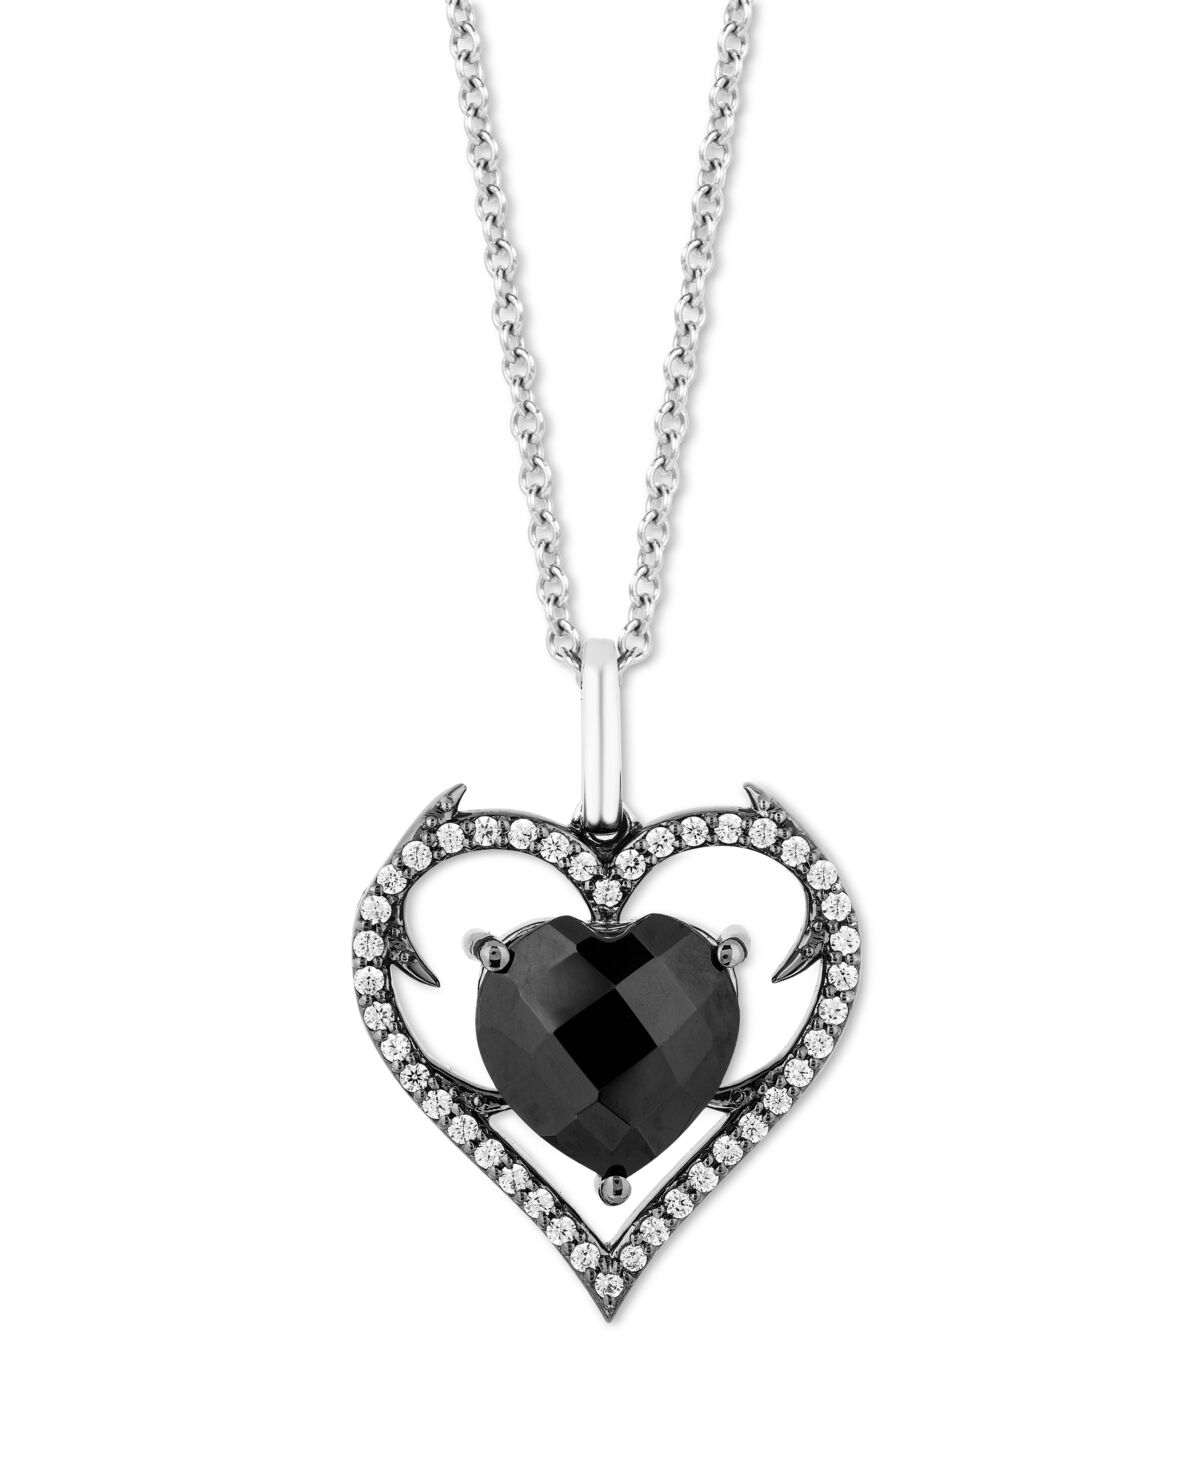 Disney Enchanted Disney Fine Jewelry Onyx & Diamond (1/6 ct. t.w.) Maleficent Heart Pendant Necklace in Black Rhodium-Plated Sterling Silver, 16